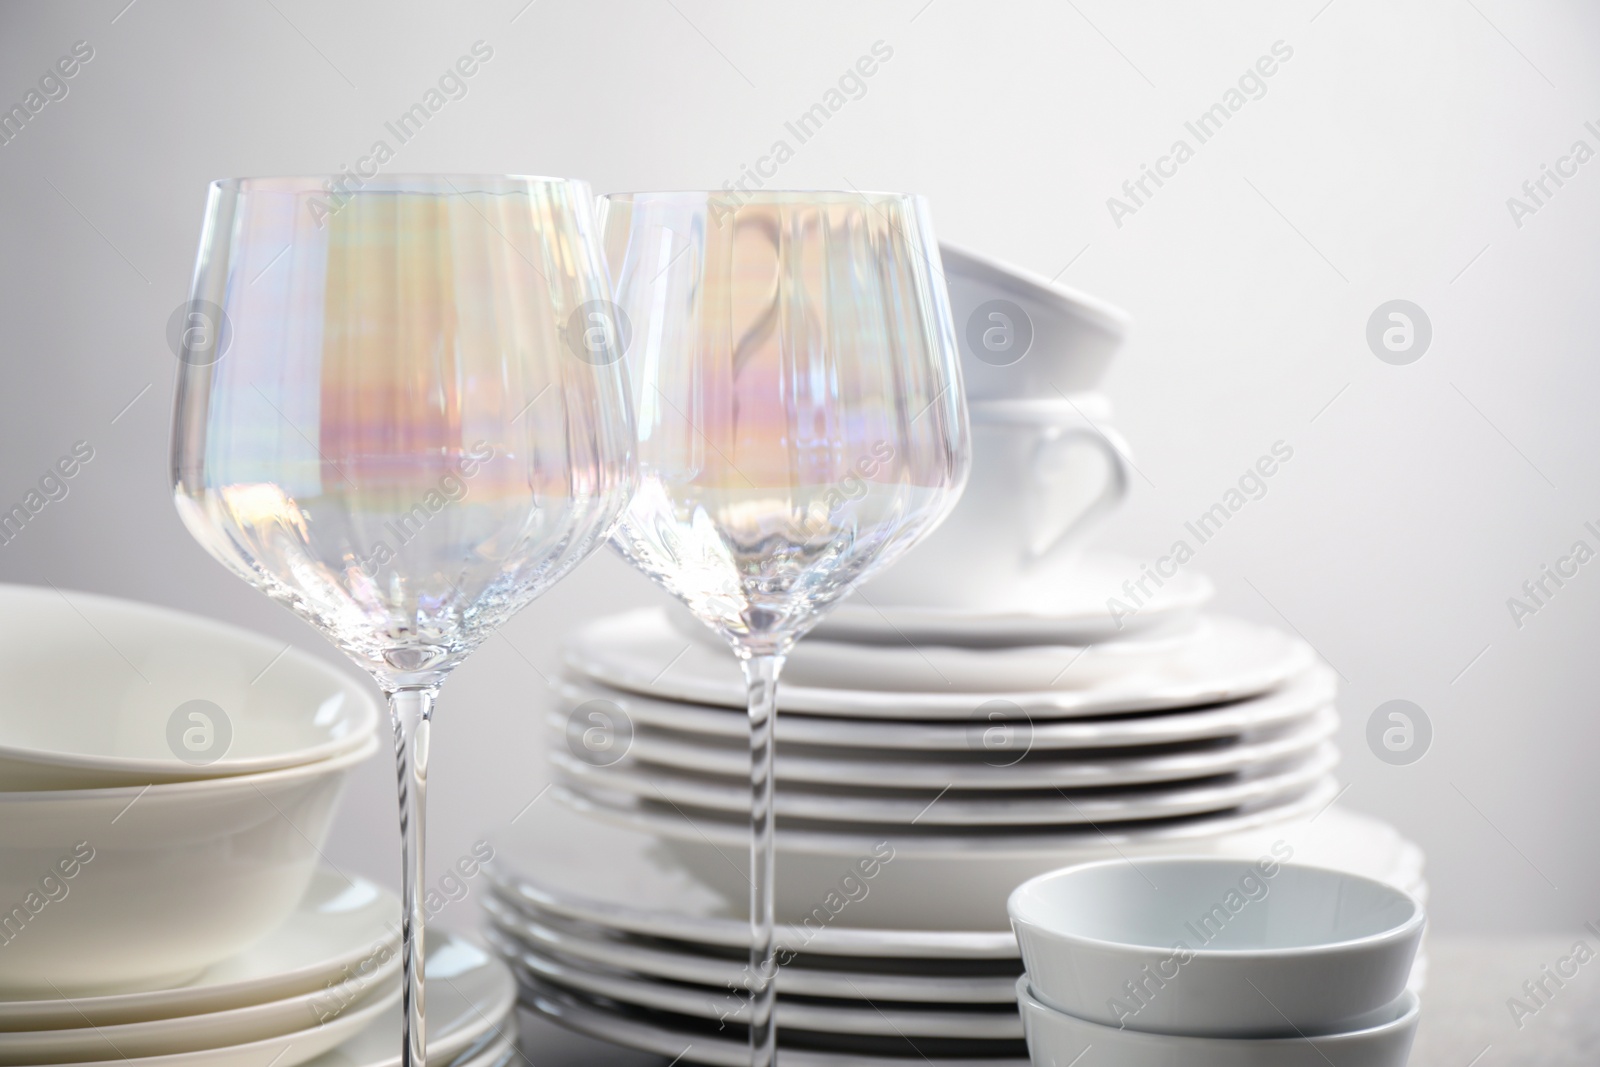 Photo of Set of clean dishes and glasses on table